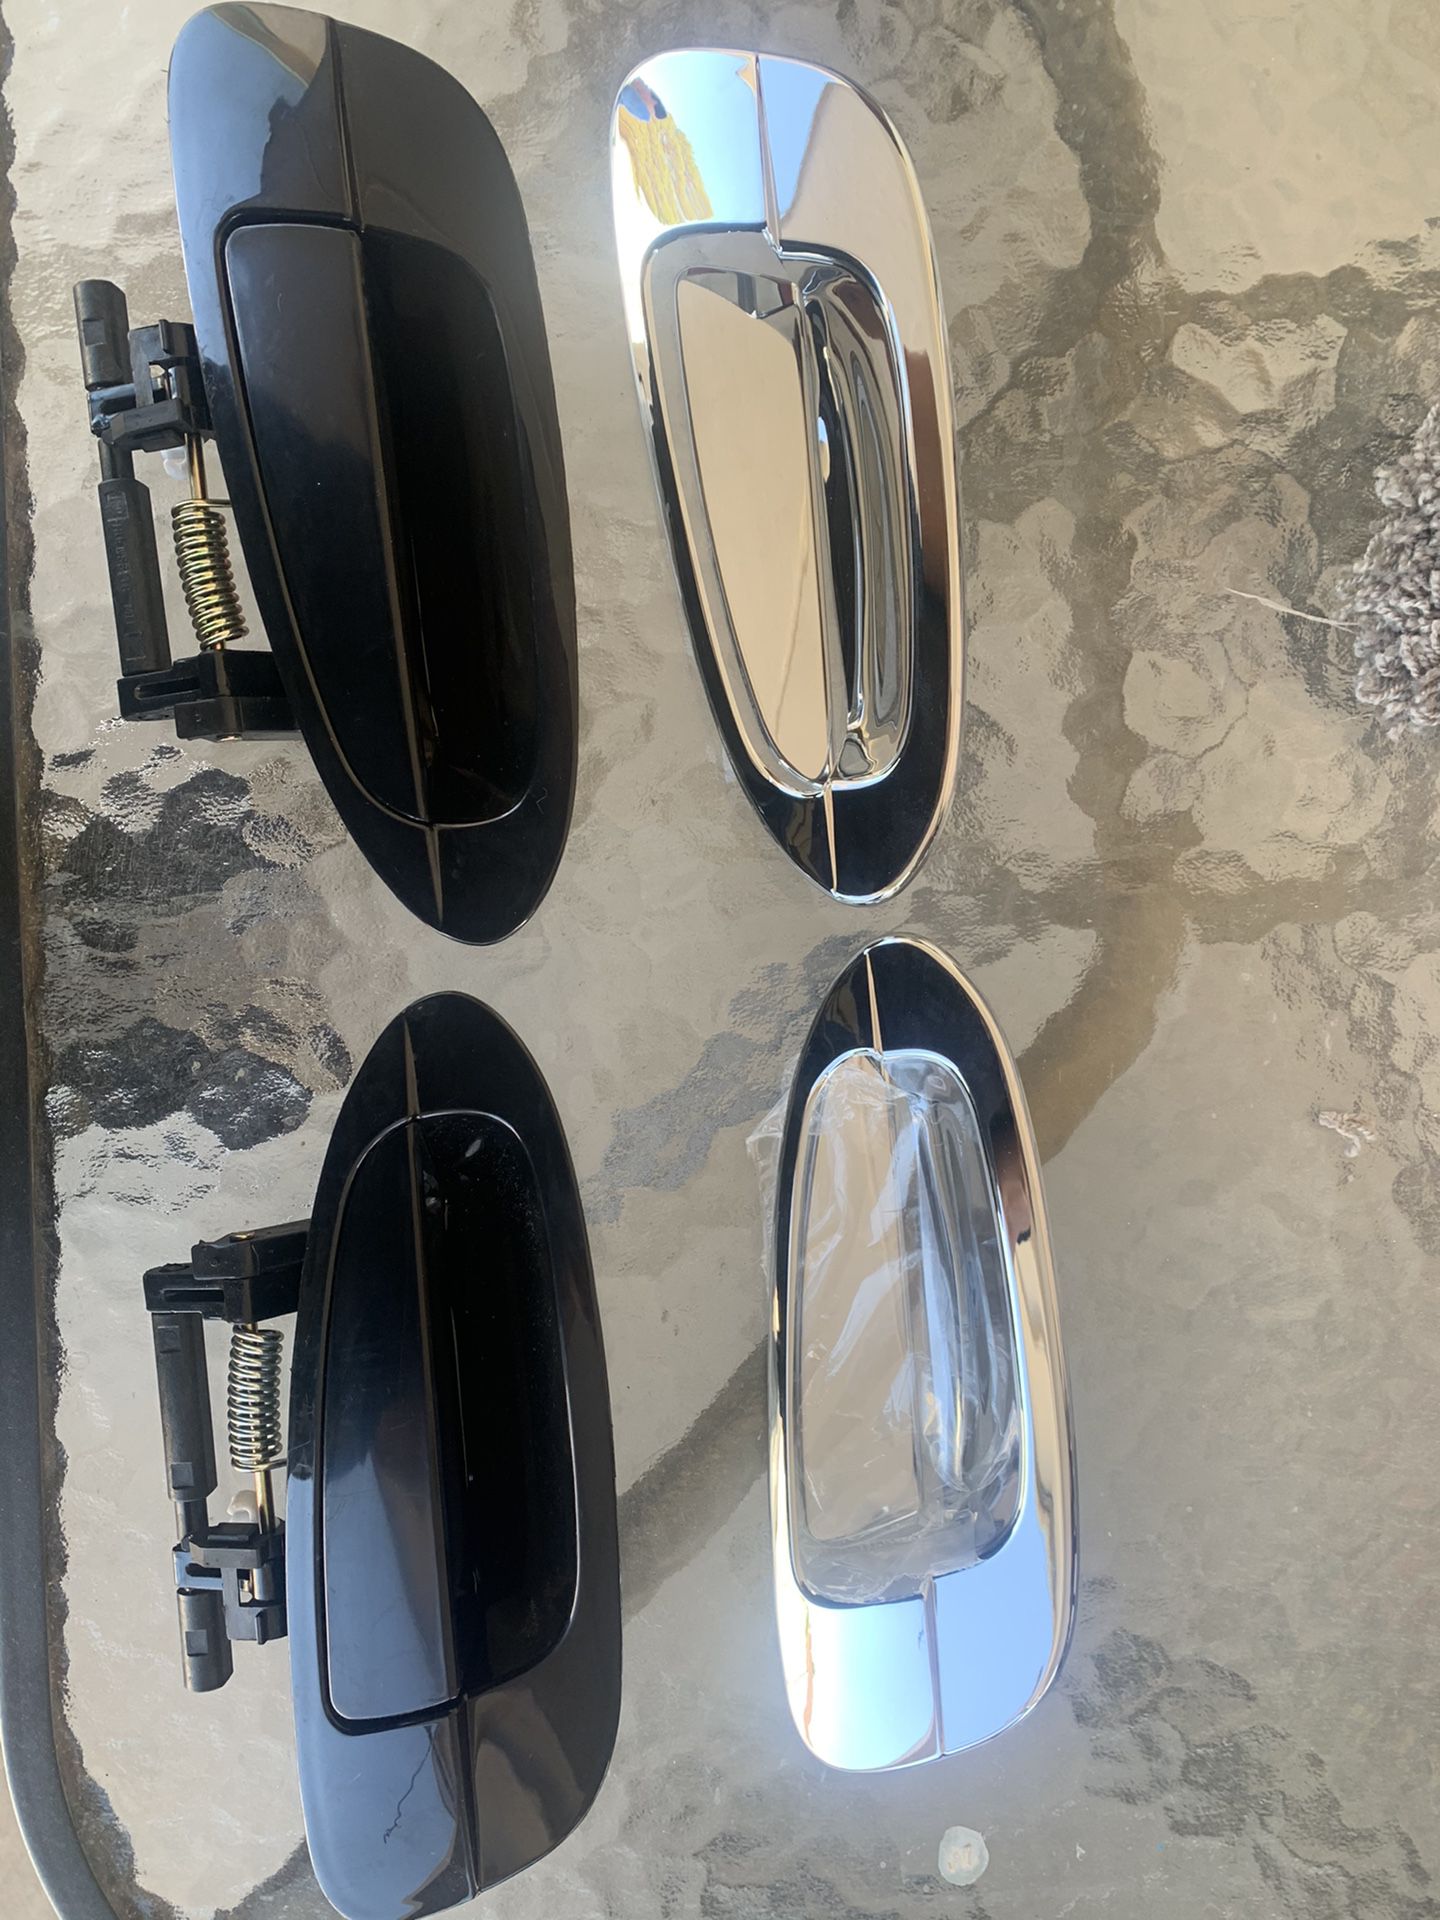 Door Handles & covers forNissan Altima 2003 $20.00 Everything